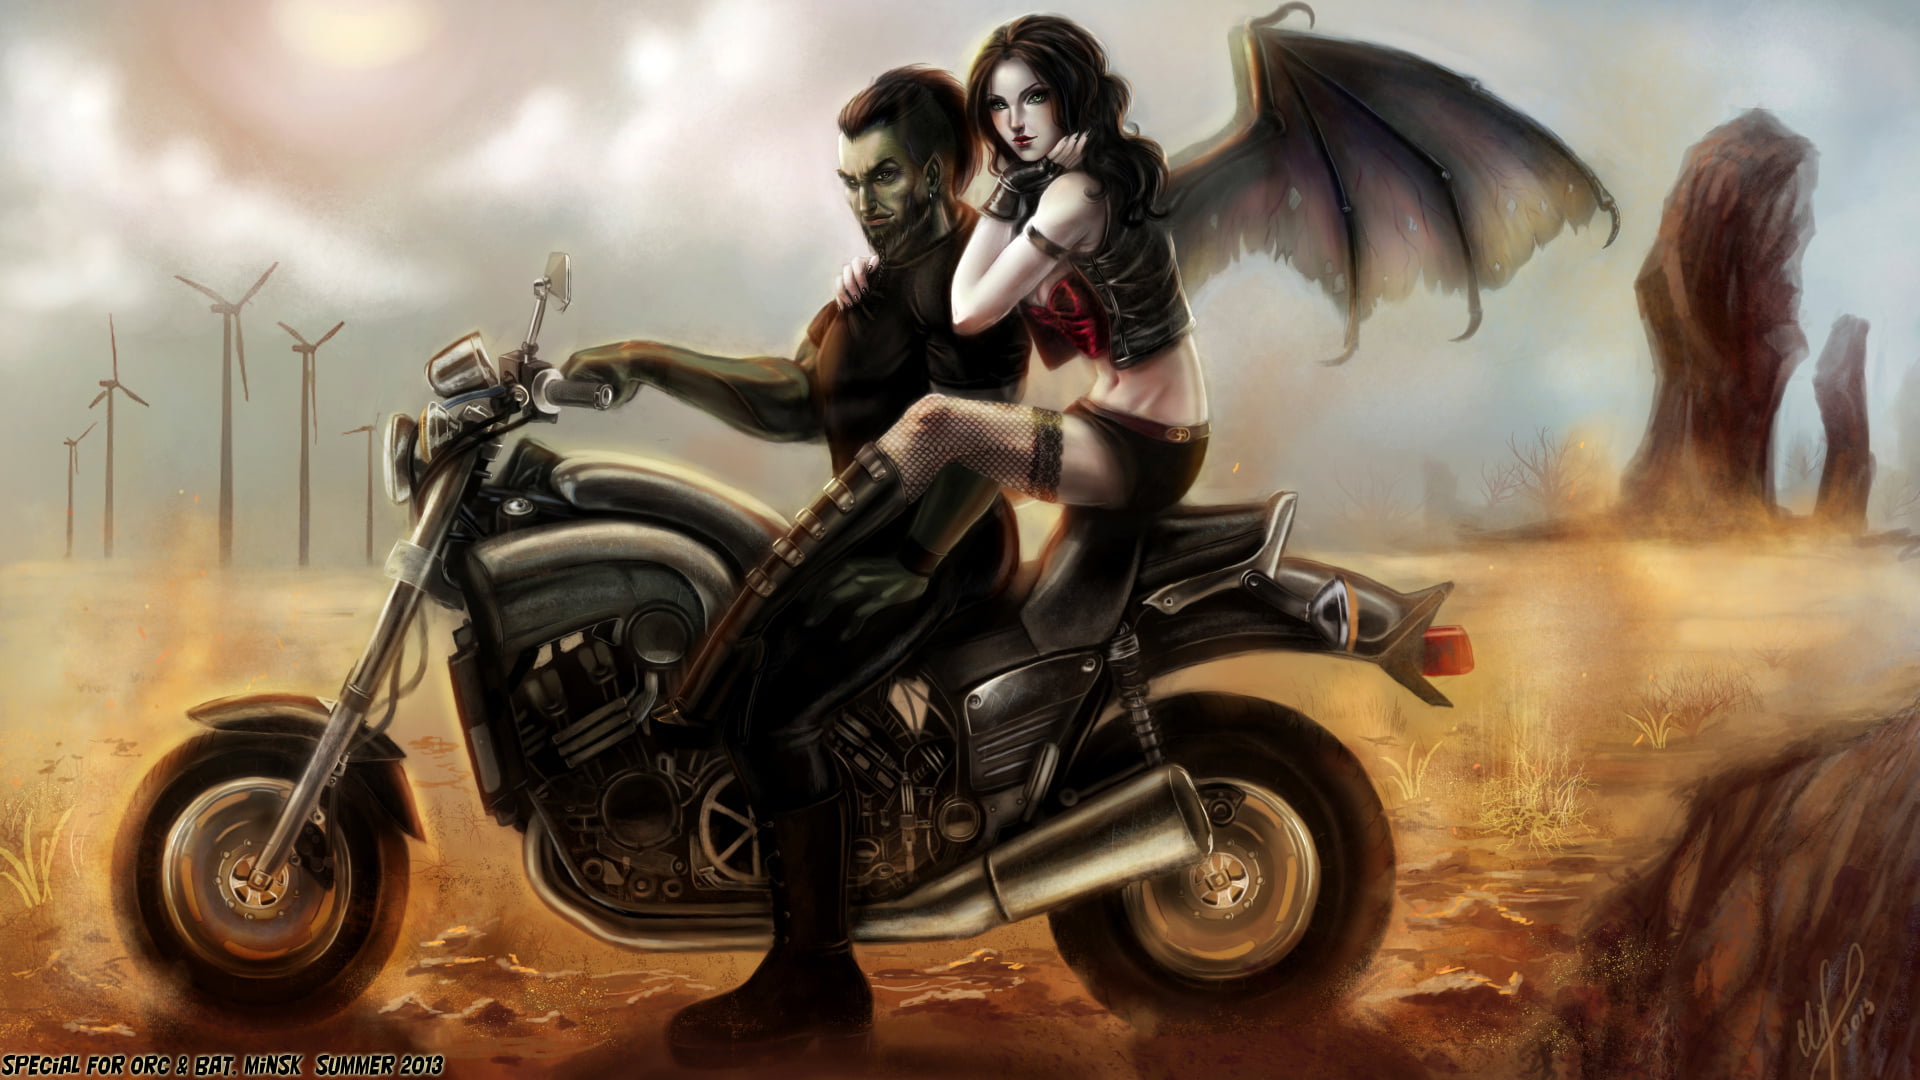 man and woman riding motorcycle painting, girl, desert, wings